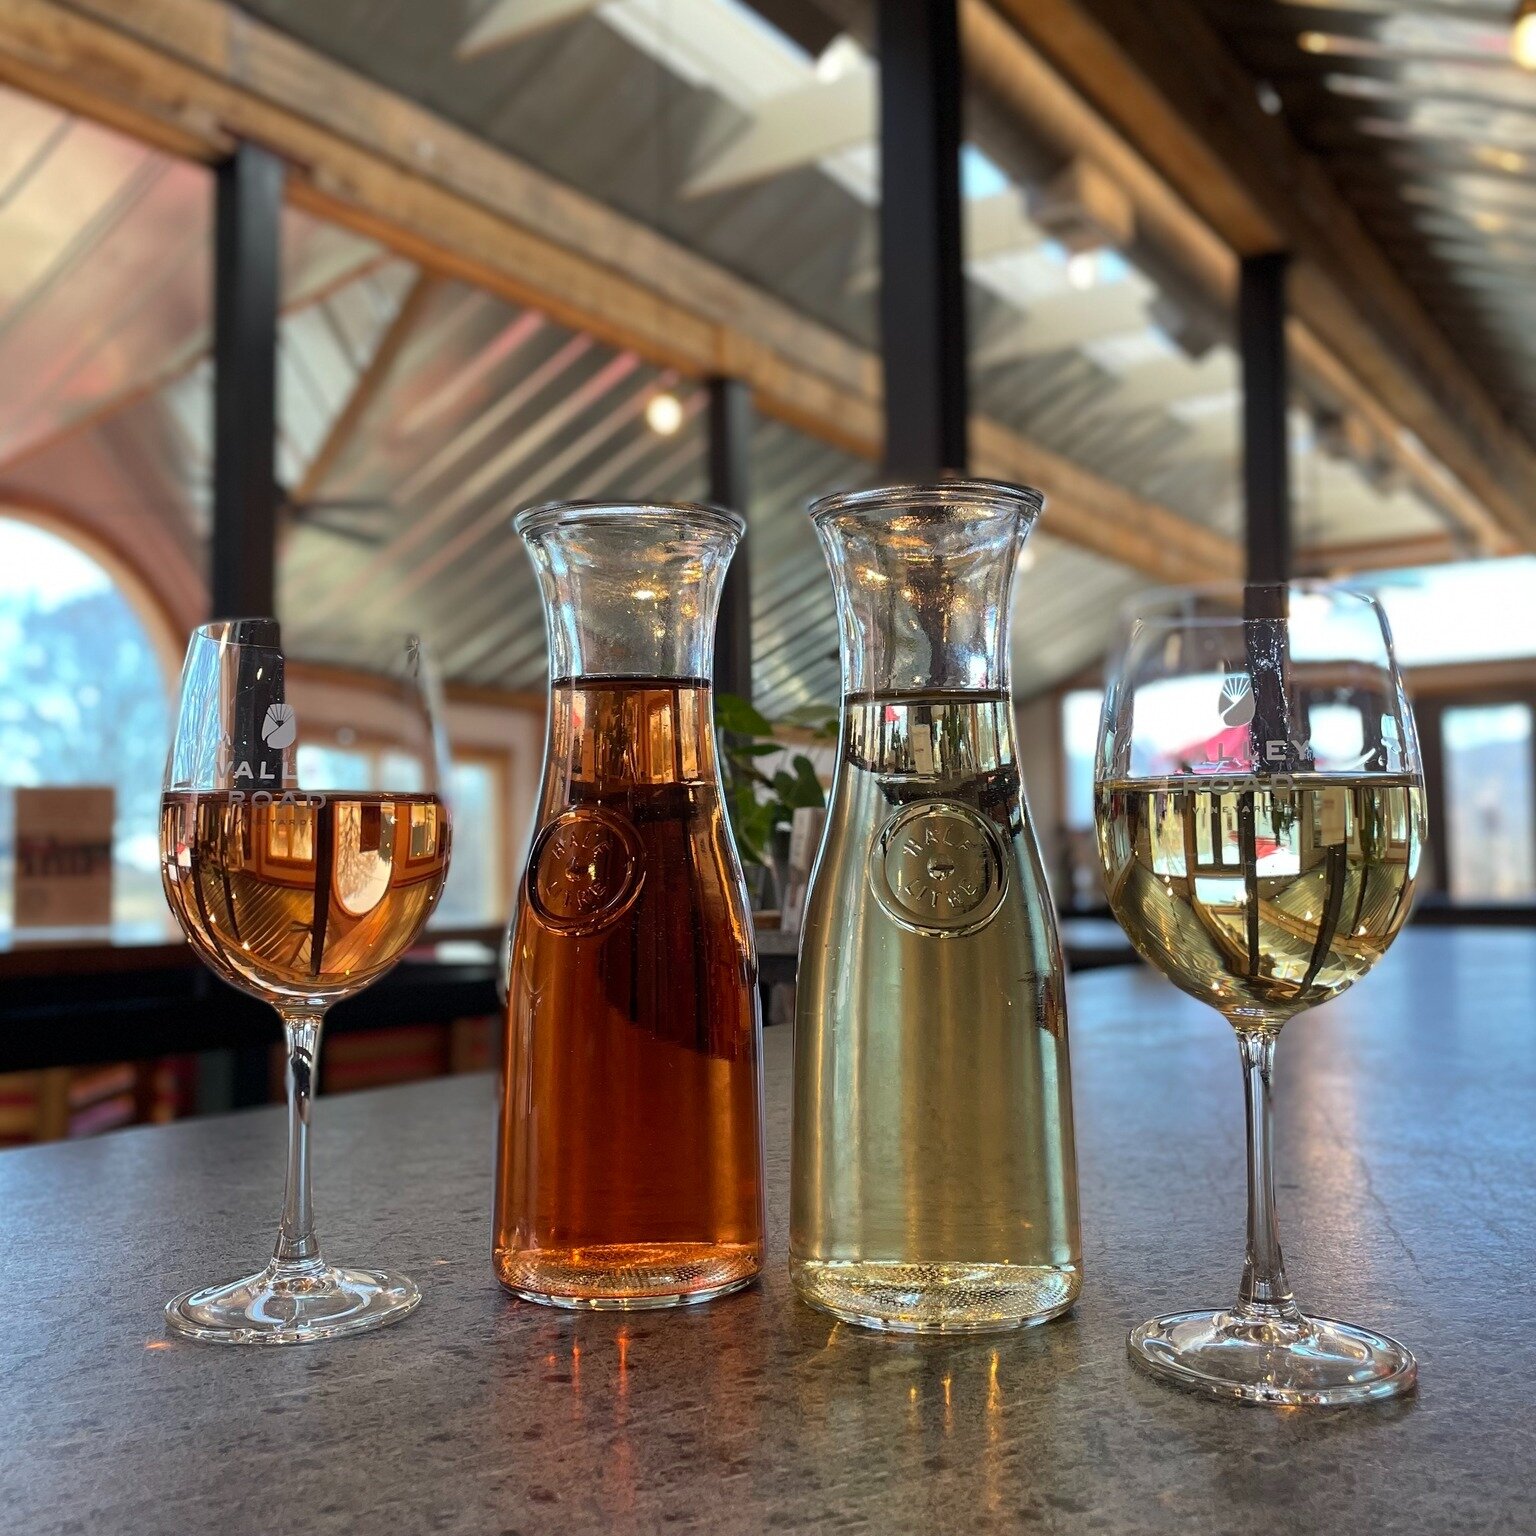 $12 Saturday wine carafe specials continue through March!

3/9 Mountain Glen White
3/16 Mountain Glen Ros&eacute;
3/23 Mountain Glen White
3/30 Mountain Glen Ros&eacute;

Plus, we have some great 2022 Ros&eacute; specials by the glass and (6) bottles